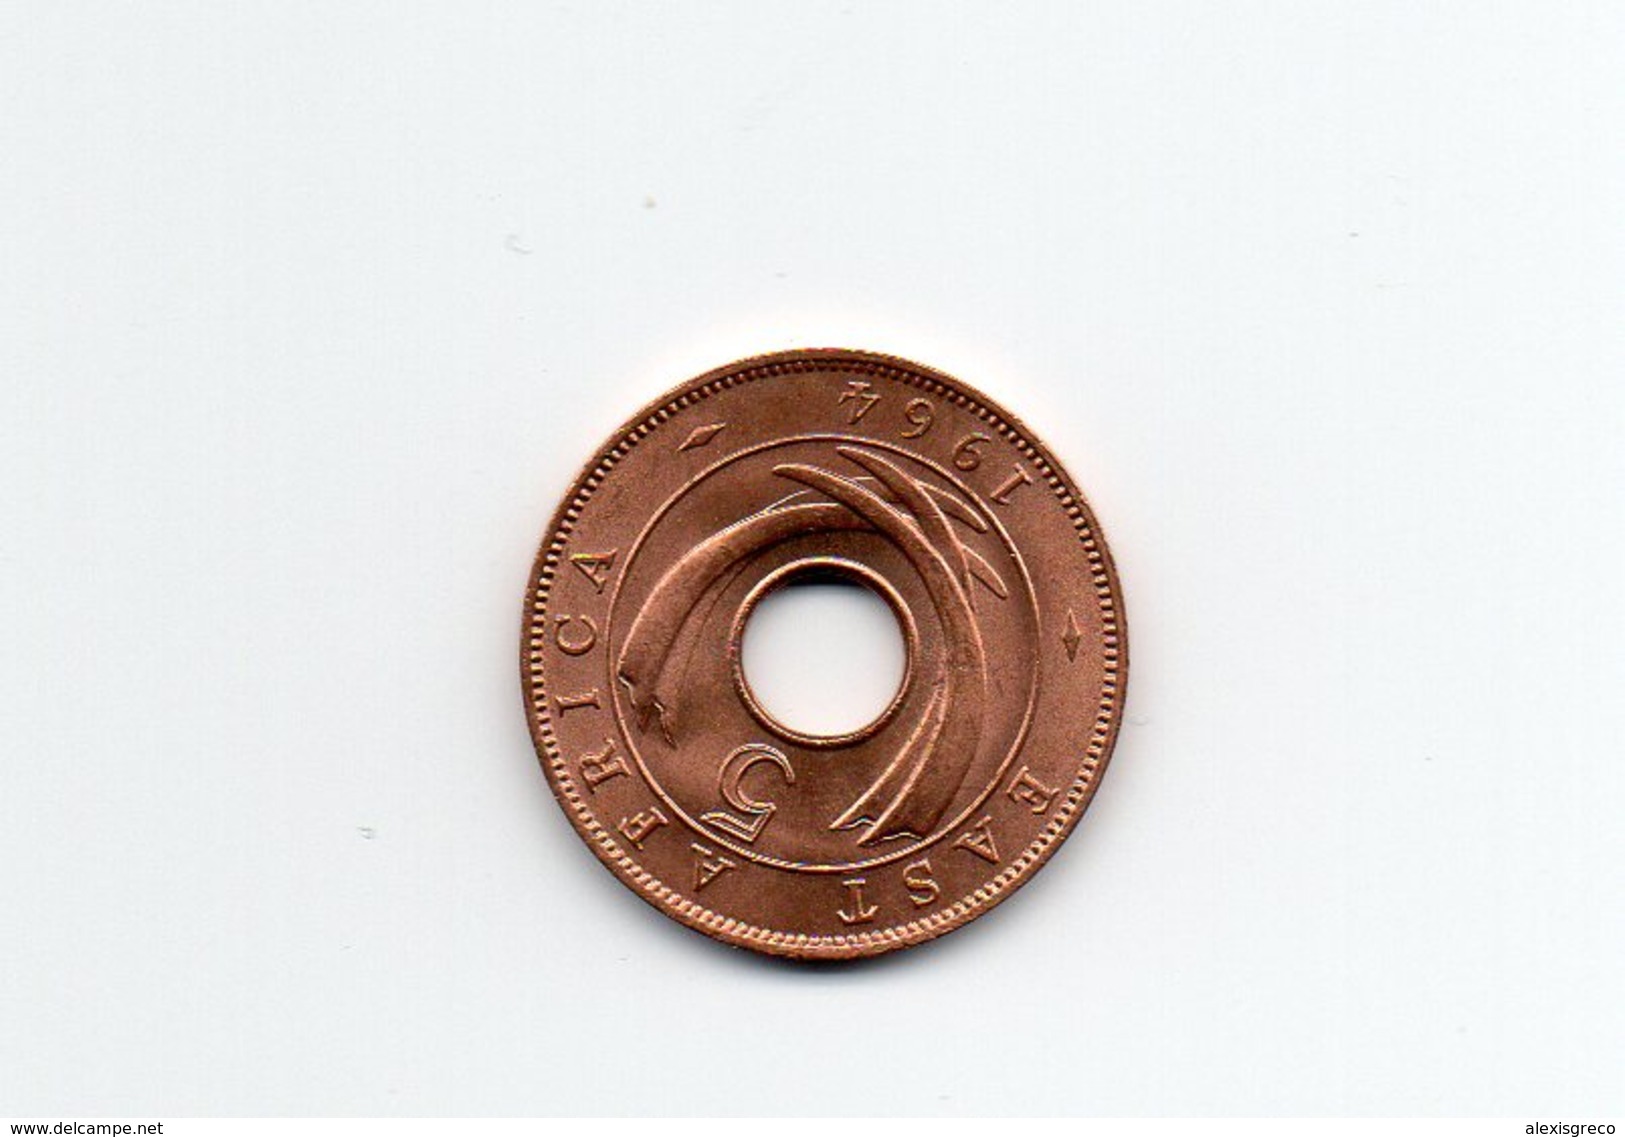 BRITISH EAST AFRICA 1964 UNCIRCULATED COIN FIVE CENTS BRONZE (Post-Independence Issue). - British Colony